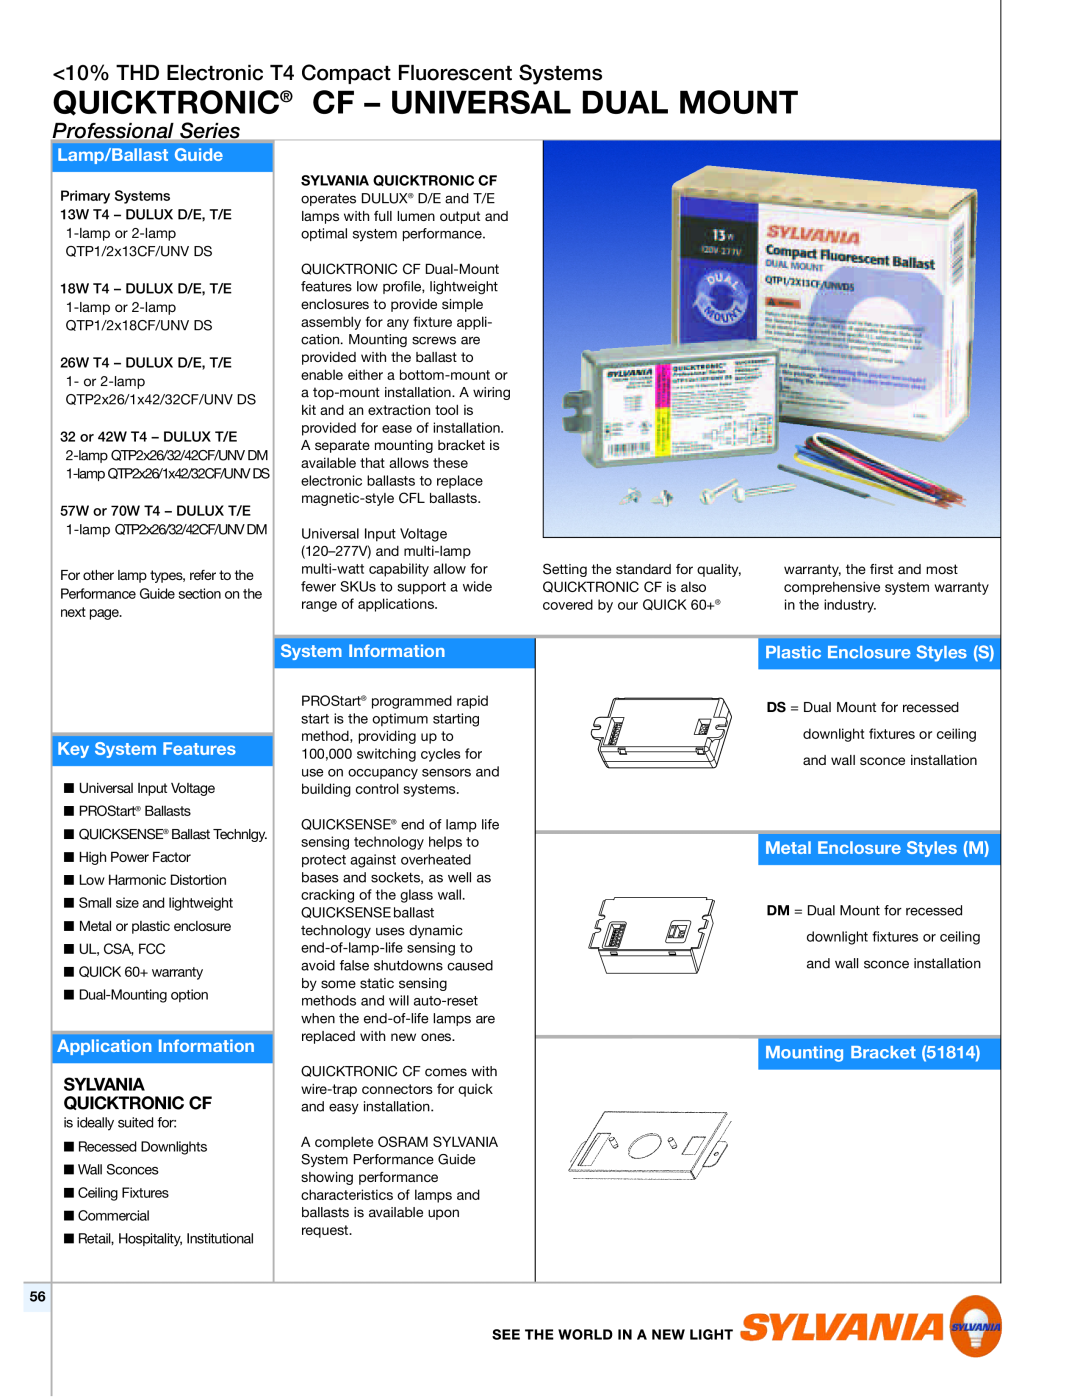 Sylvania T4 warranty Lamp/Ballast Guide, System Information, Plastic Enclosure Styles S, Key System Features, Quicktronic 